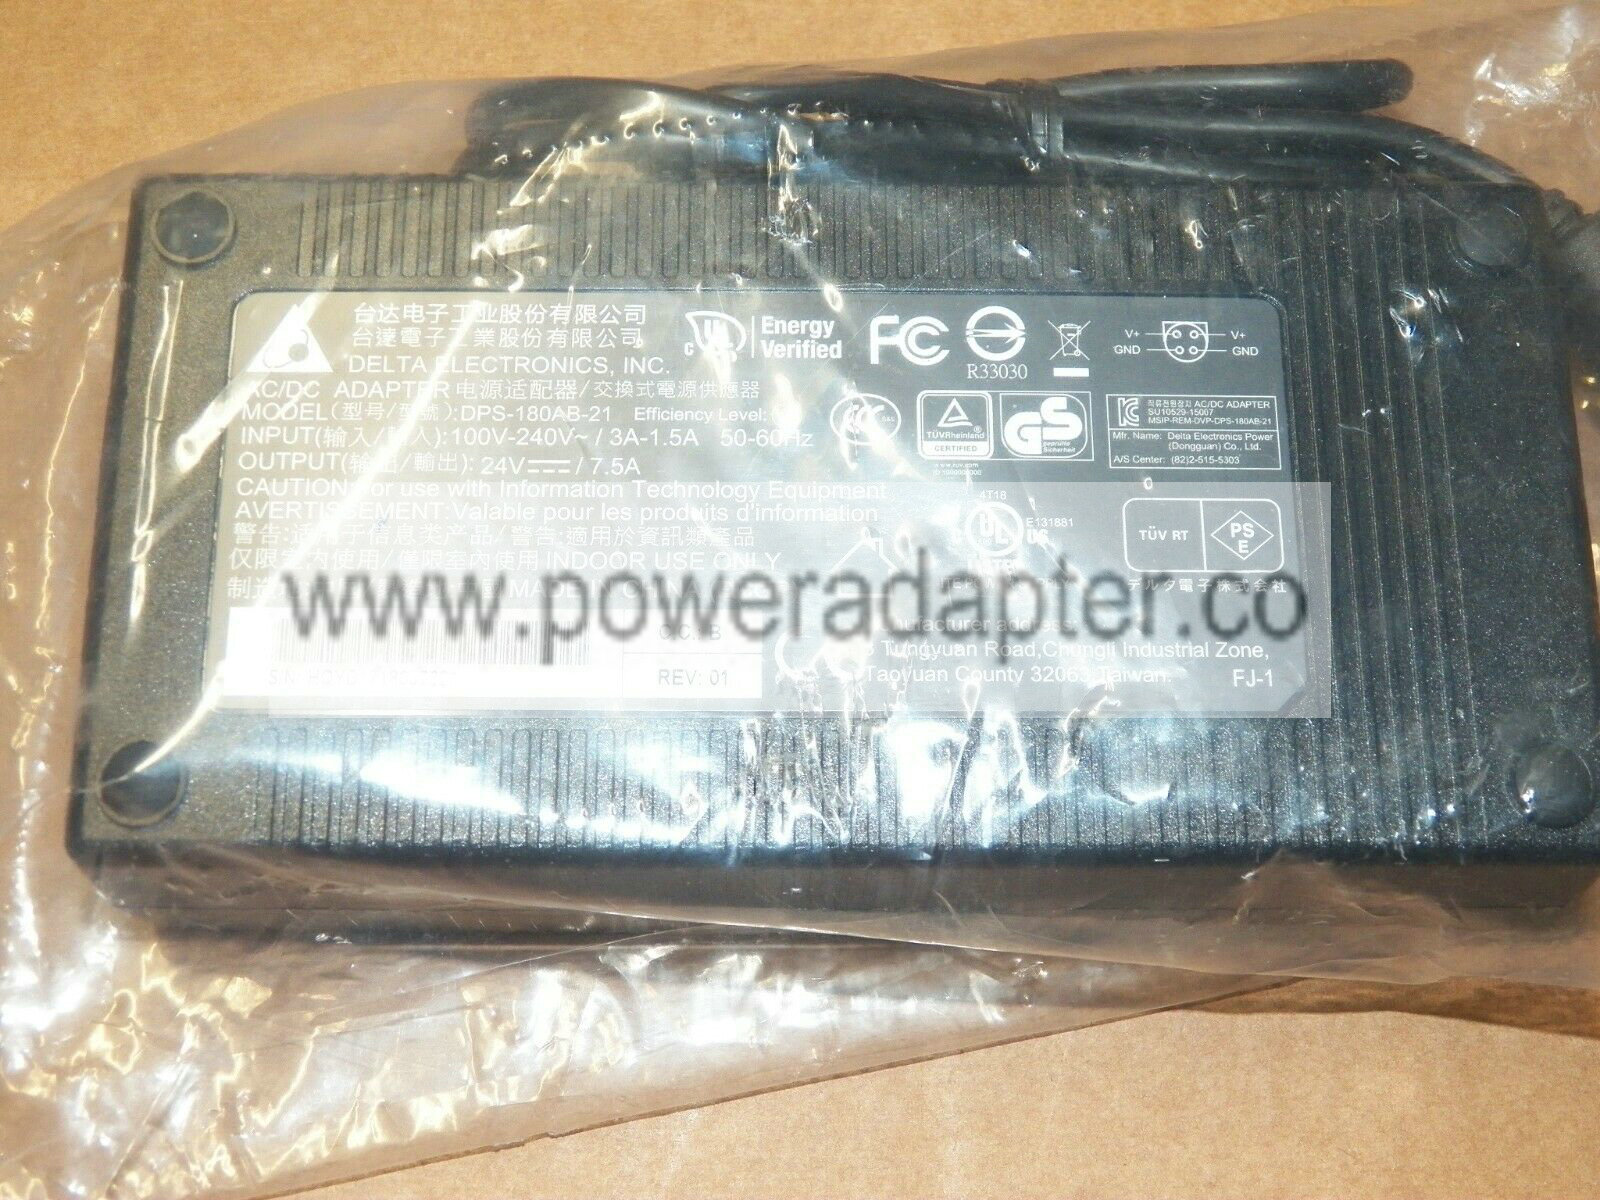 New Sealed Delta Electronics DPS-180AB-21 24V 7.5A AC adapter Max. Output Power: 180 W MPN: DPS-180AB-21 Output Vol